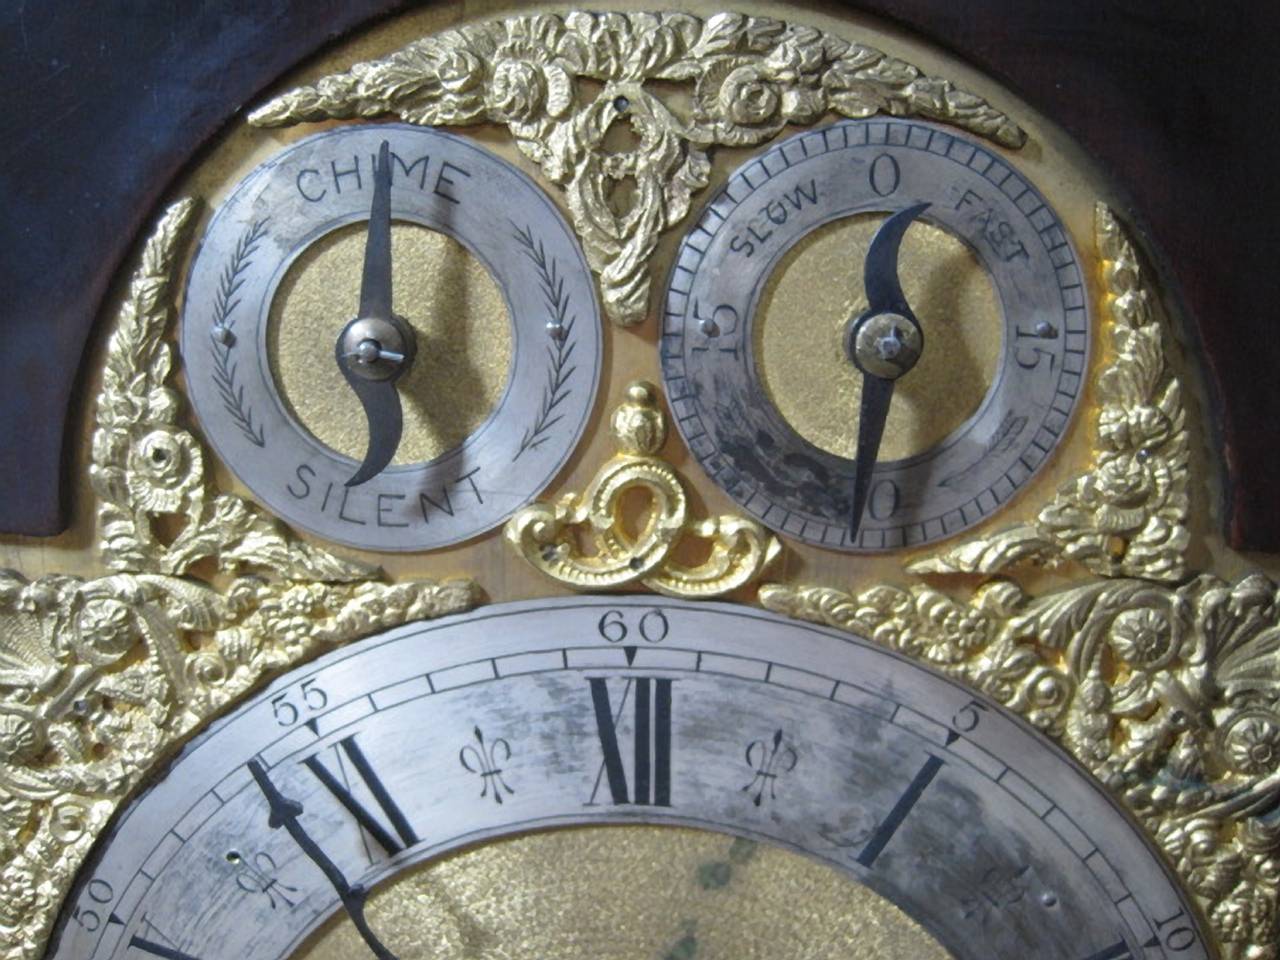 19th century Georgian English bracket clock.

A fine quality 8-day mahogany and ormolu-mounted triple chain Fusee 4-Gong Westminster Chime bracket clock. The high quality mahogany and gilt ormolu-mounted chamfered topped case with fluted gilt